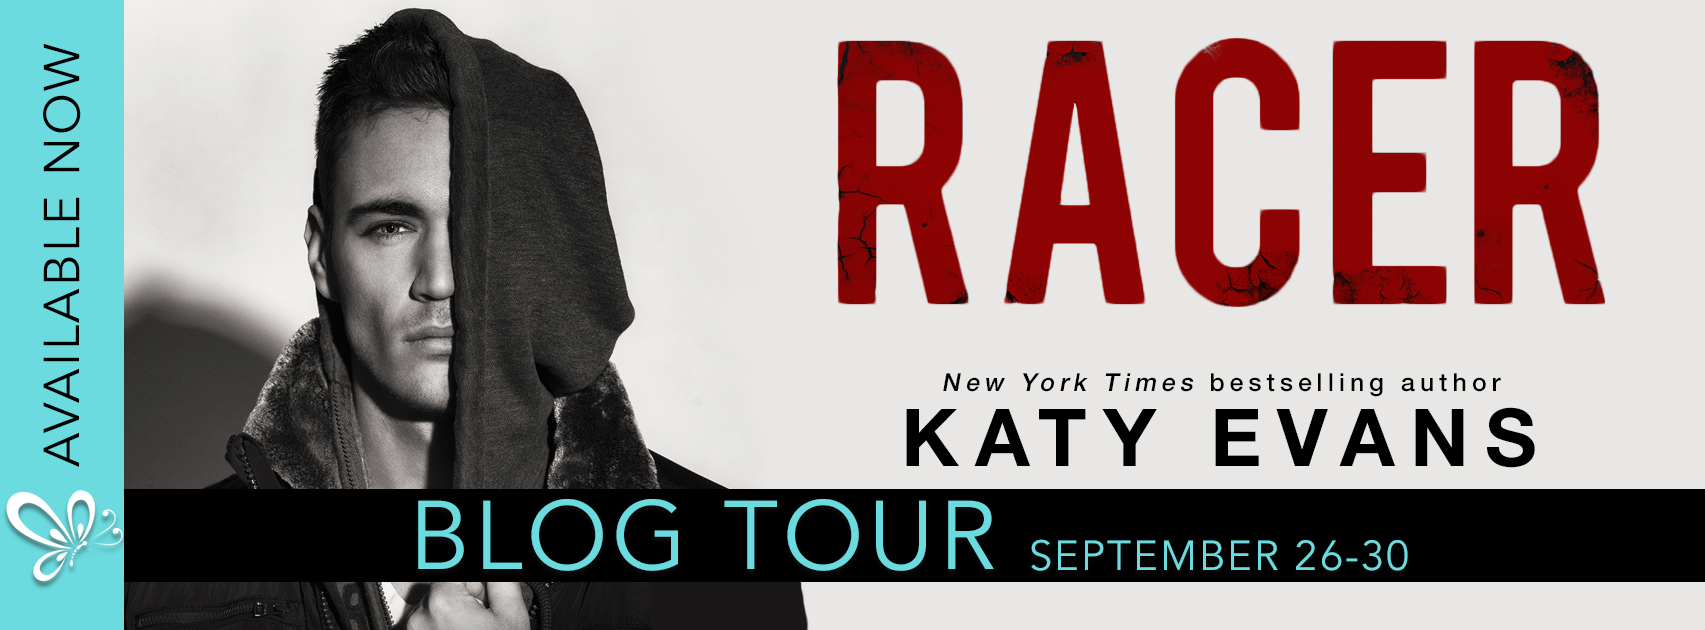 Blog Tour:  Racer by Katy Evans